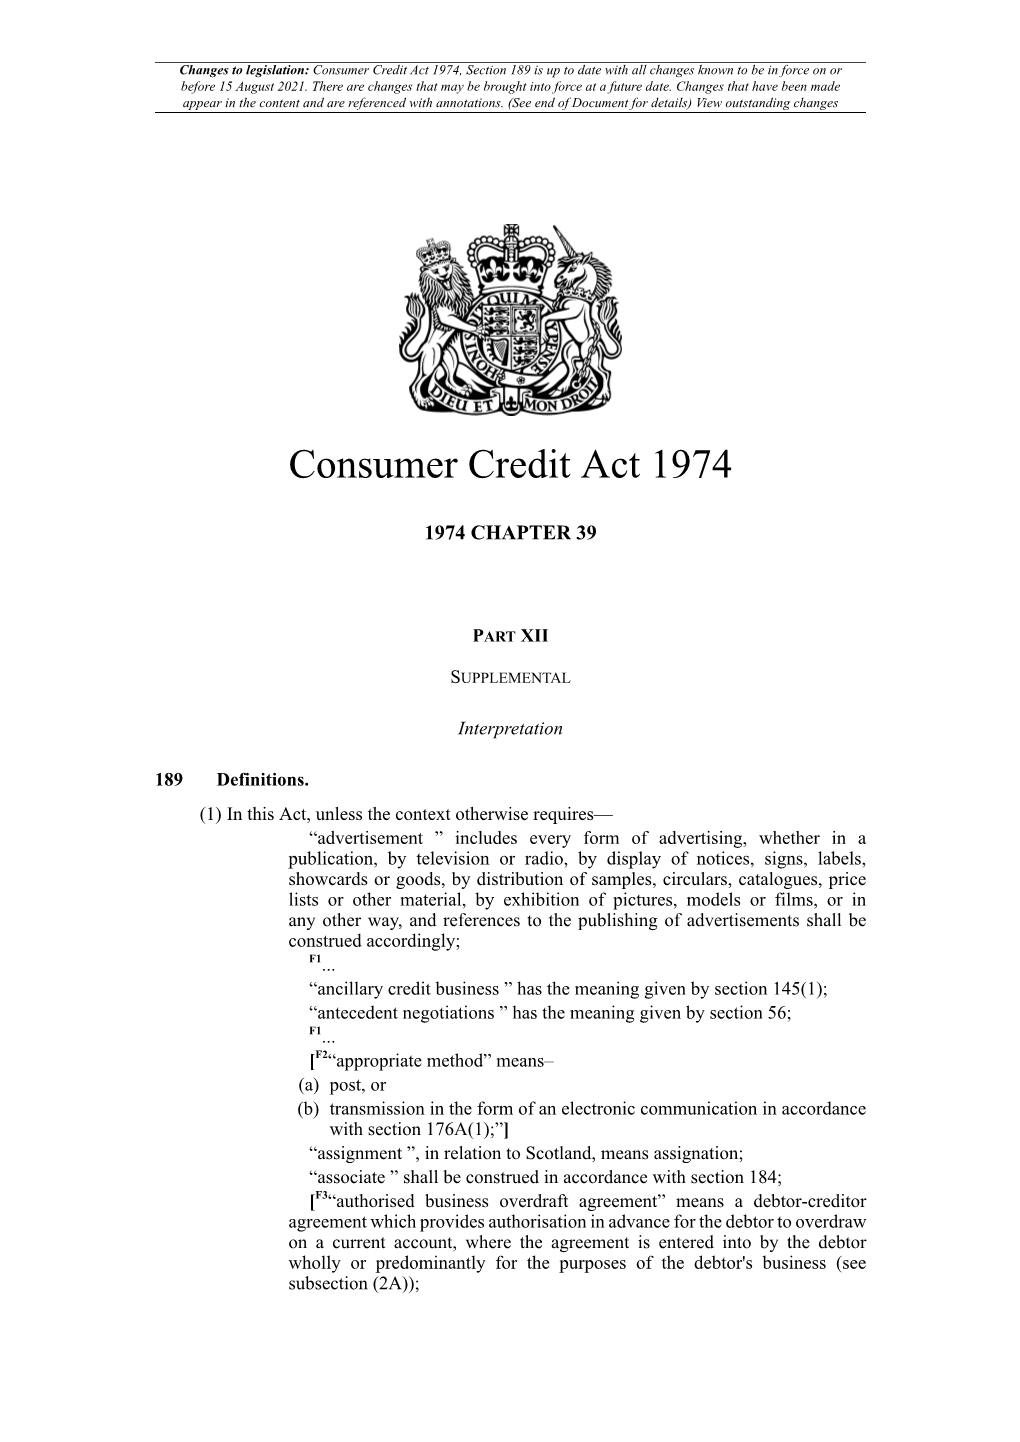 Consumer Credit Act 1974, Section 189 Is up to Date with All Changes Known to Be in Force on Or Before 15 August 2021